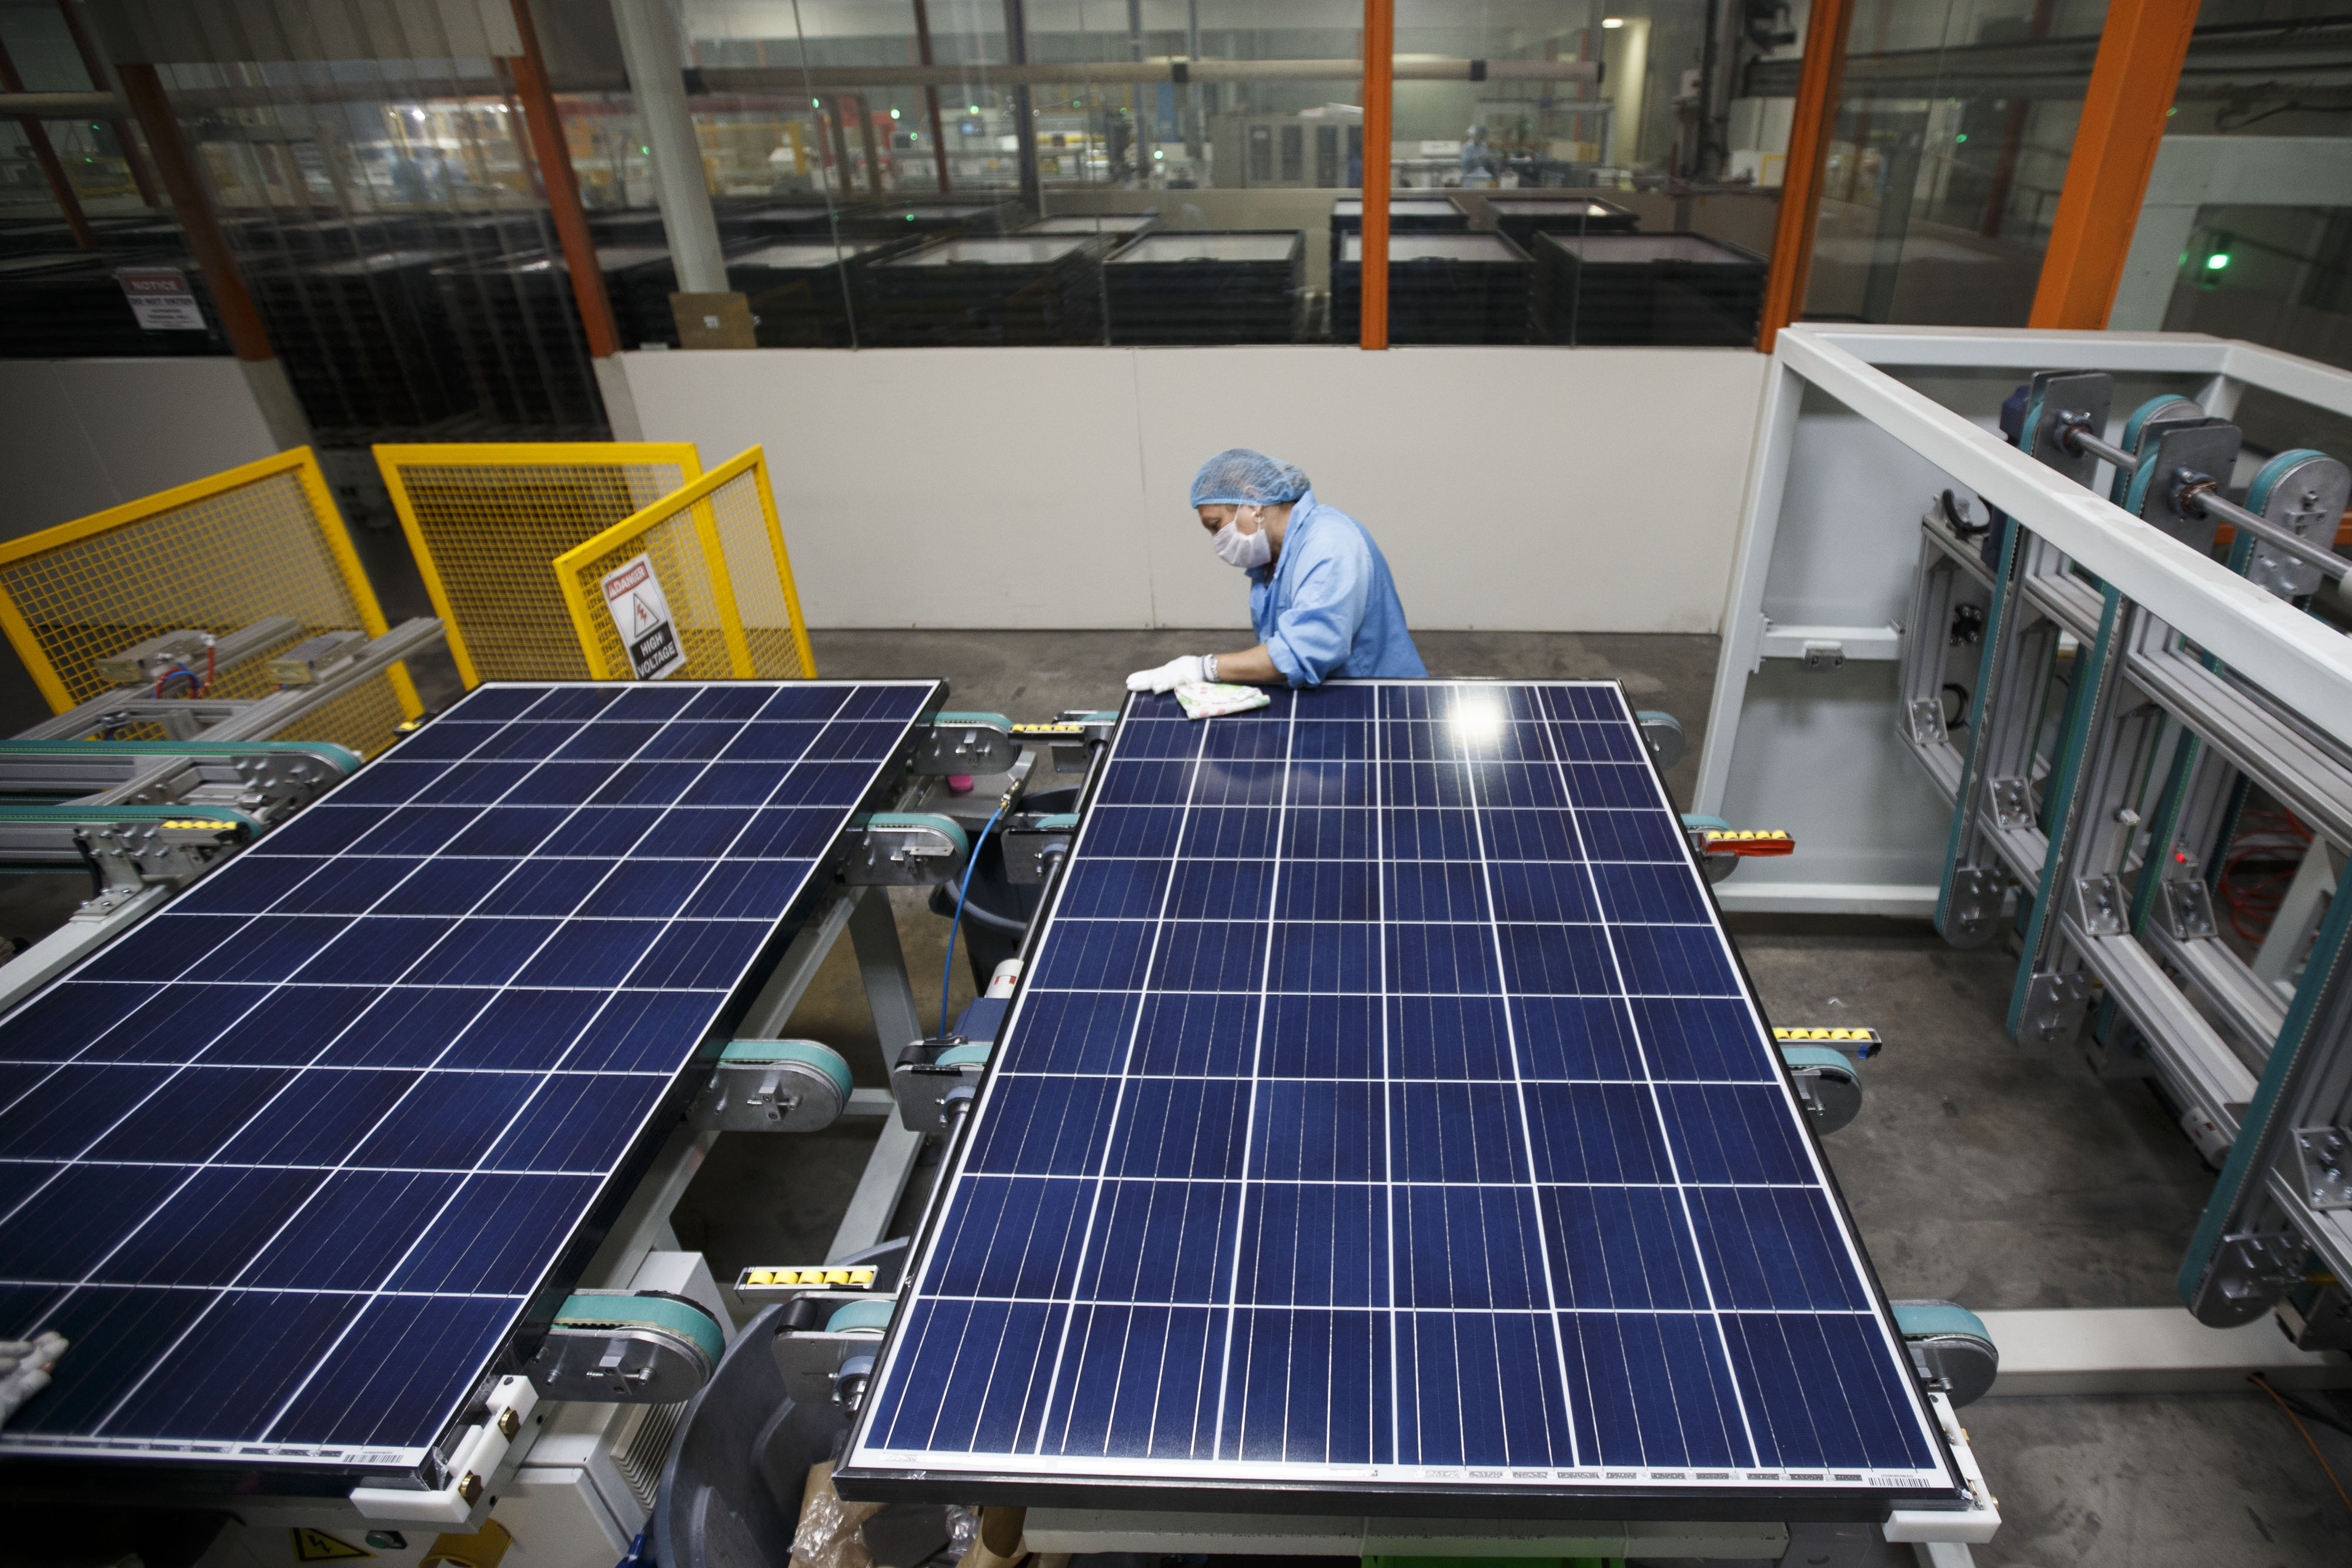 Solar Panel Manufacturing At The SunSpark Technology Inc. Facility As Industry Dodges Bullet On Tariffs 